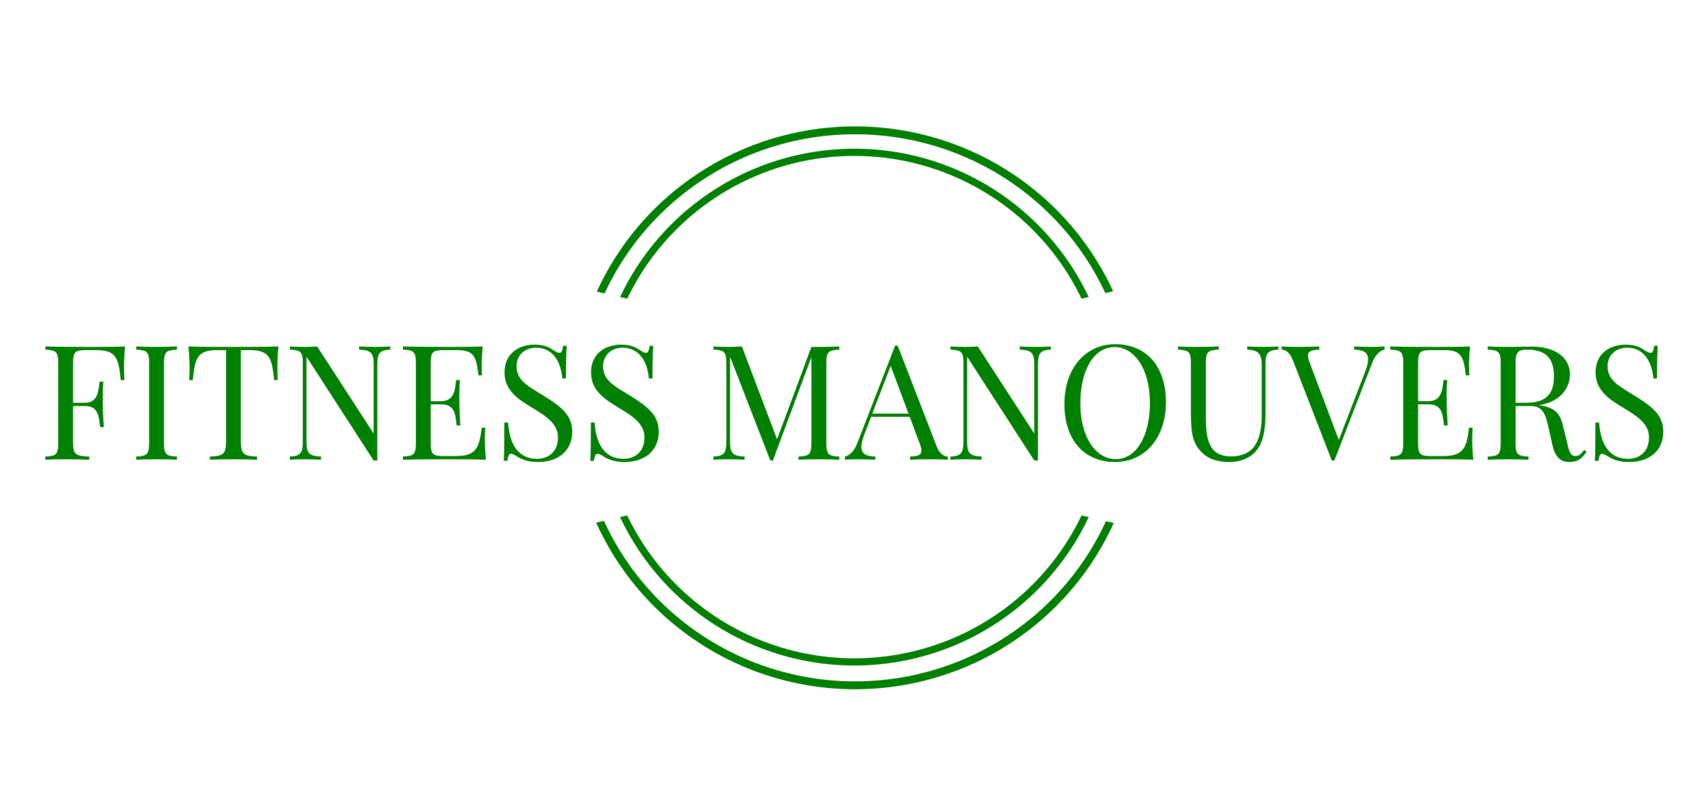 Fitness Manouvers logo in Green